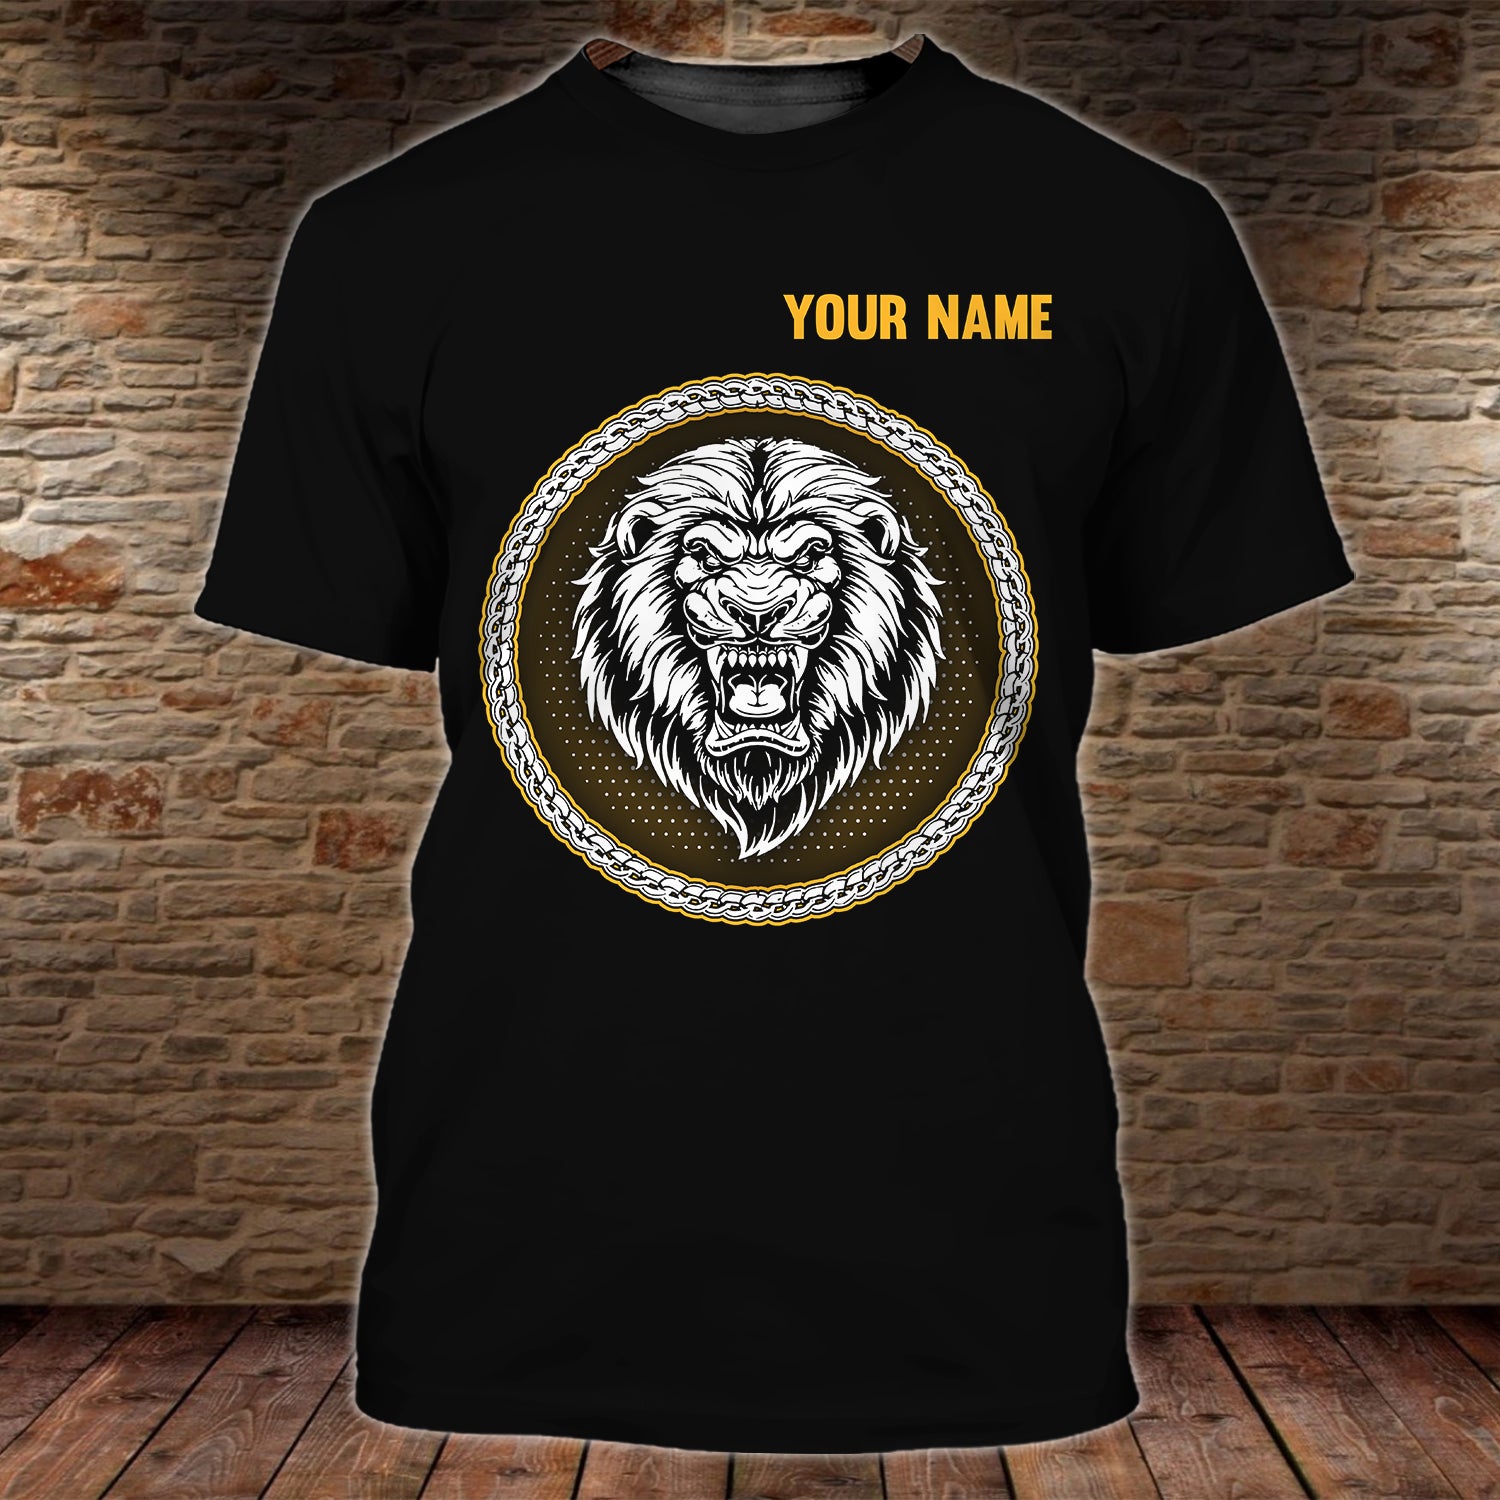 Kings Are Born in August - Personalized Name 3D Tshirt - Dah